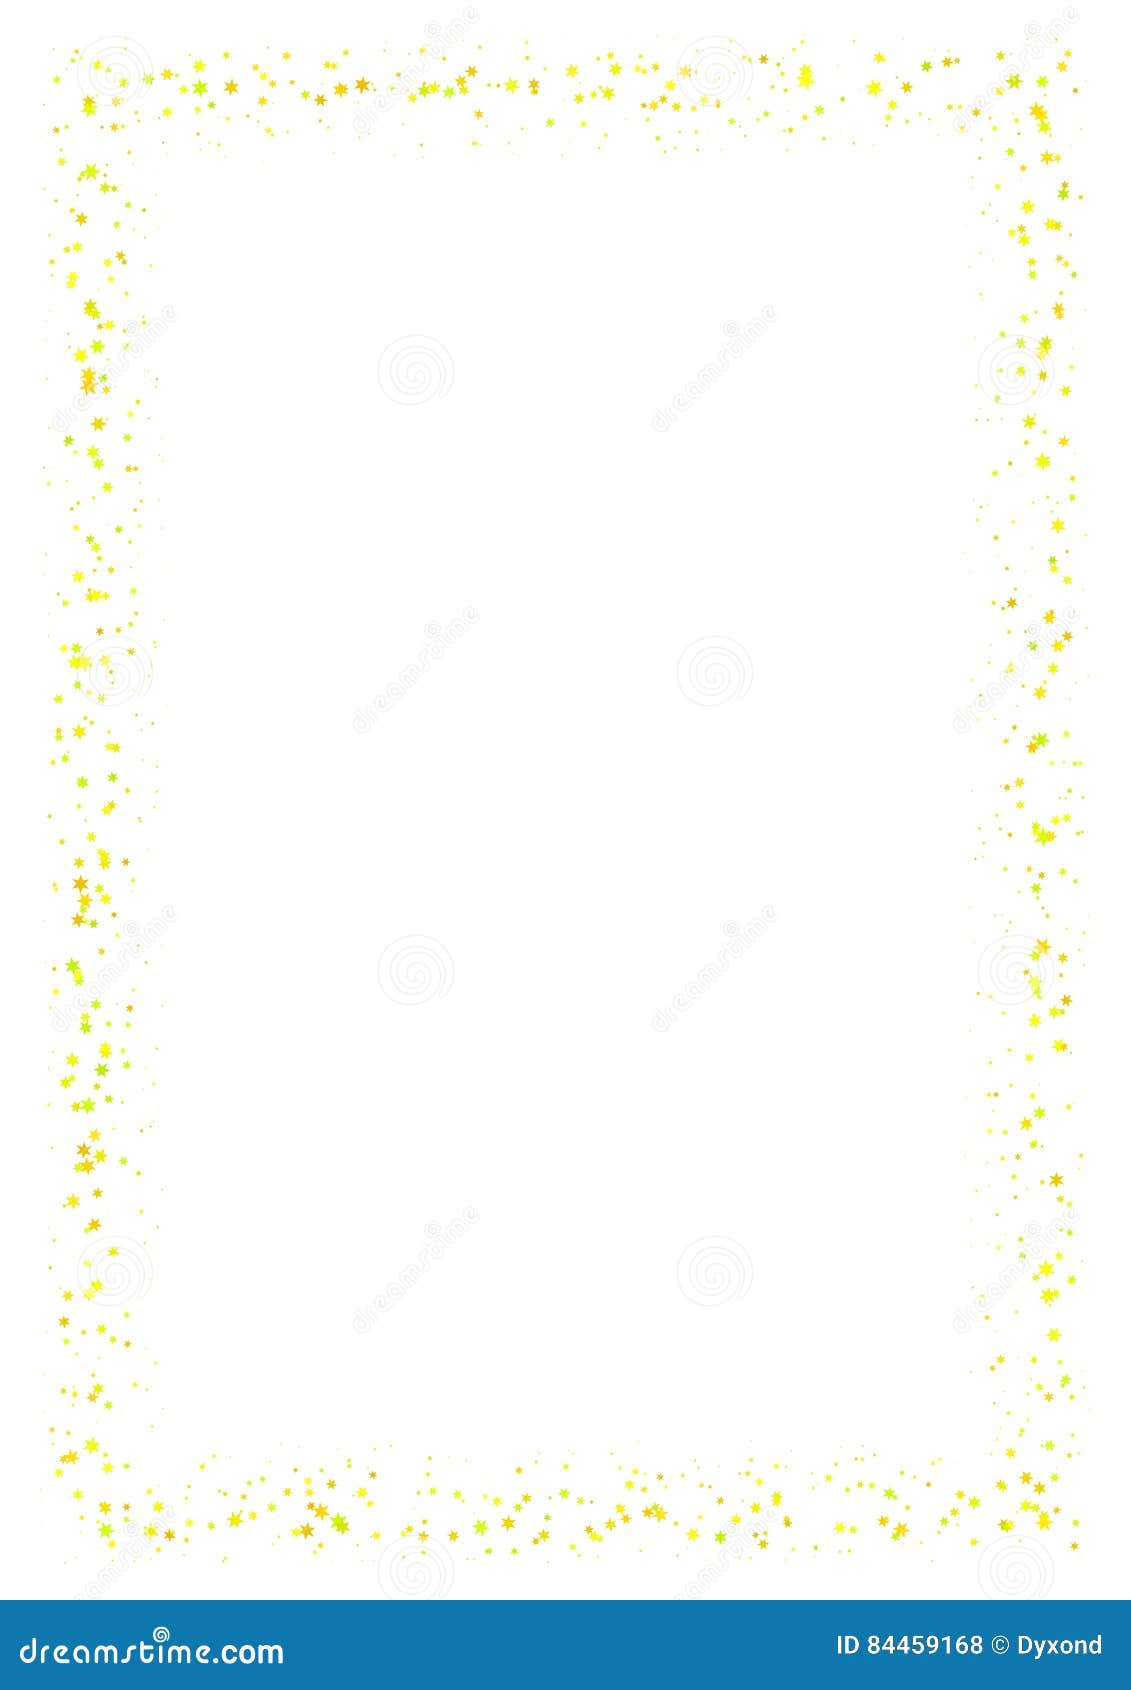 Abstract Frame Made of Small Yellow Stars on White Background. A4 Paper Size  with Light Glittering Starry Border. Stock Illustration - Illustration of  greeting, graphic: 84459168